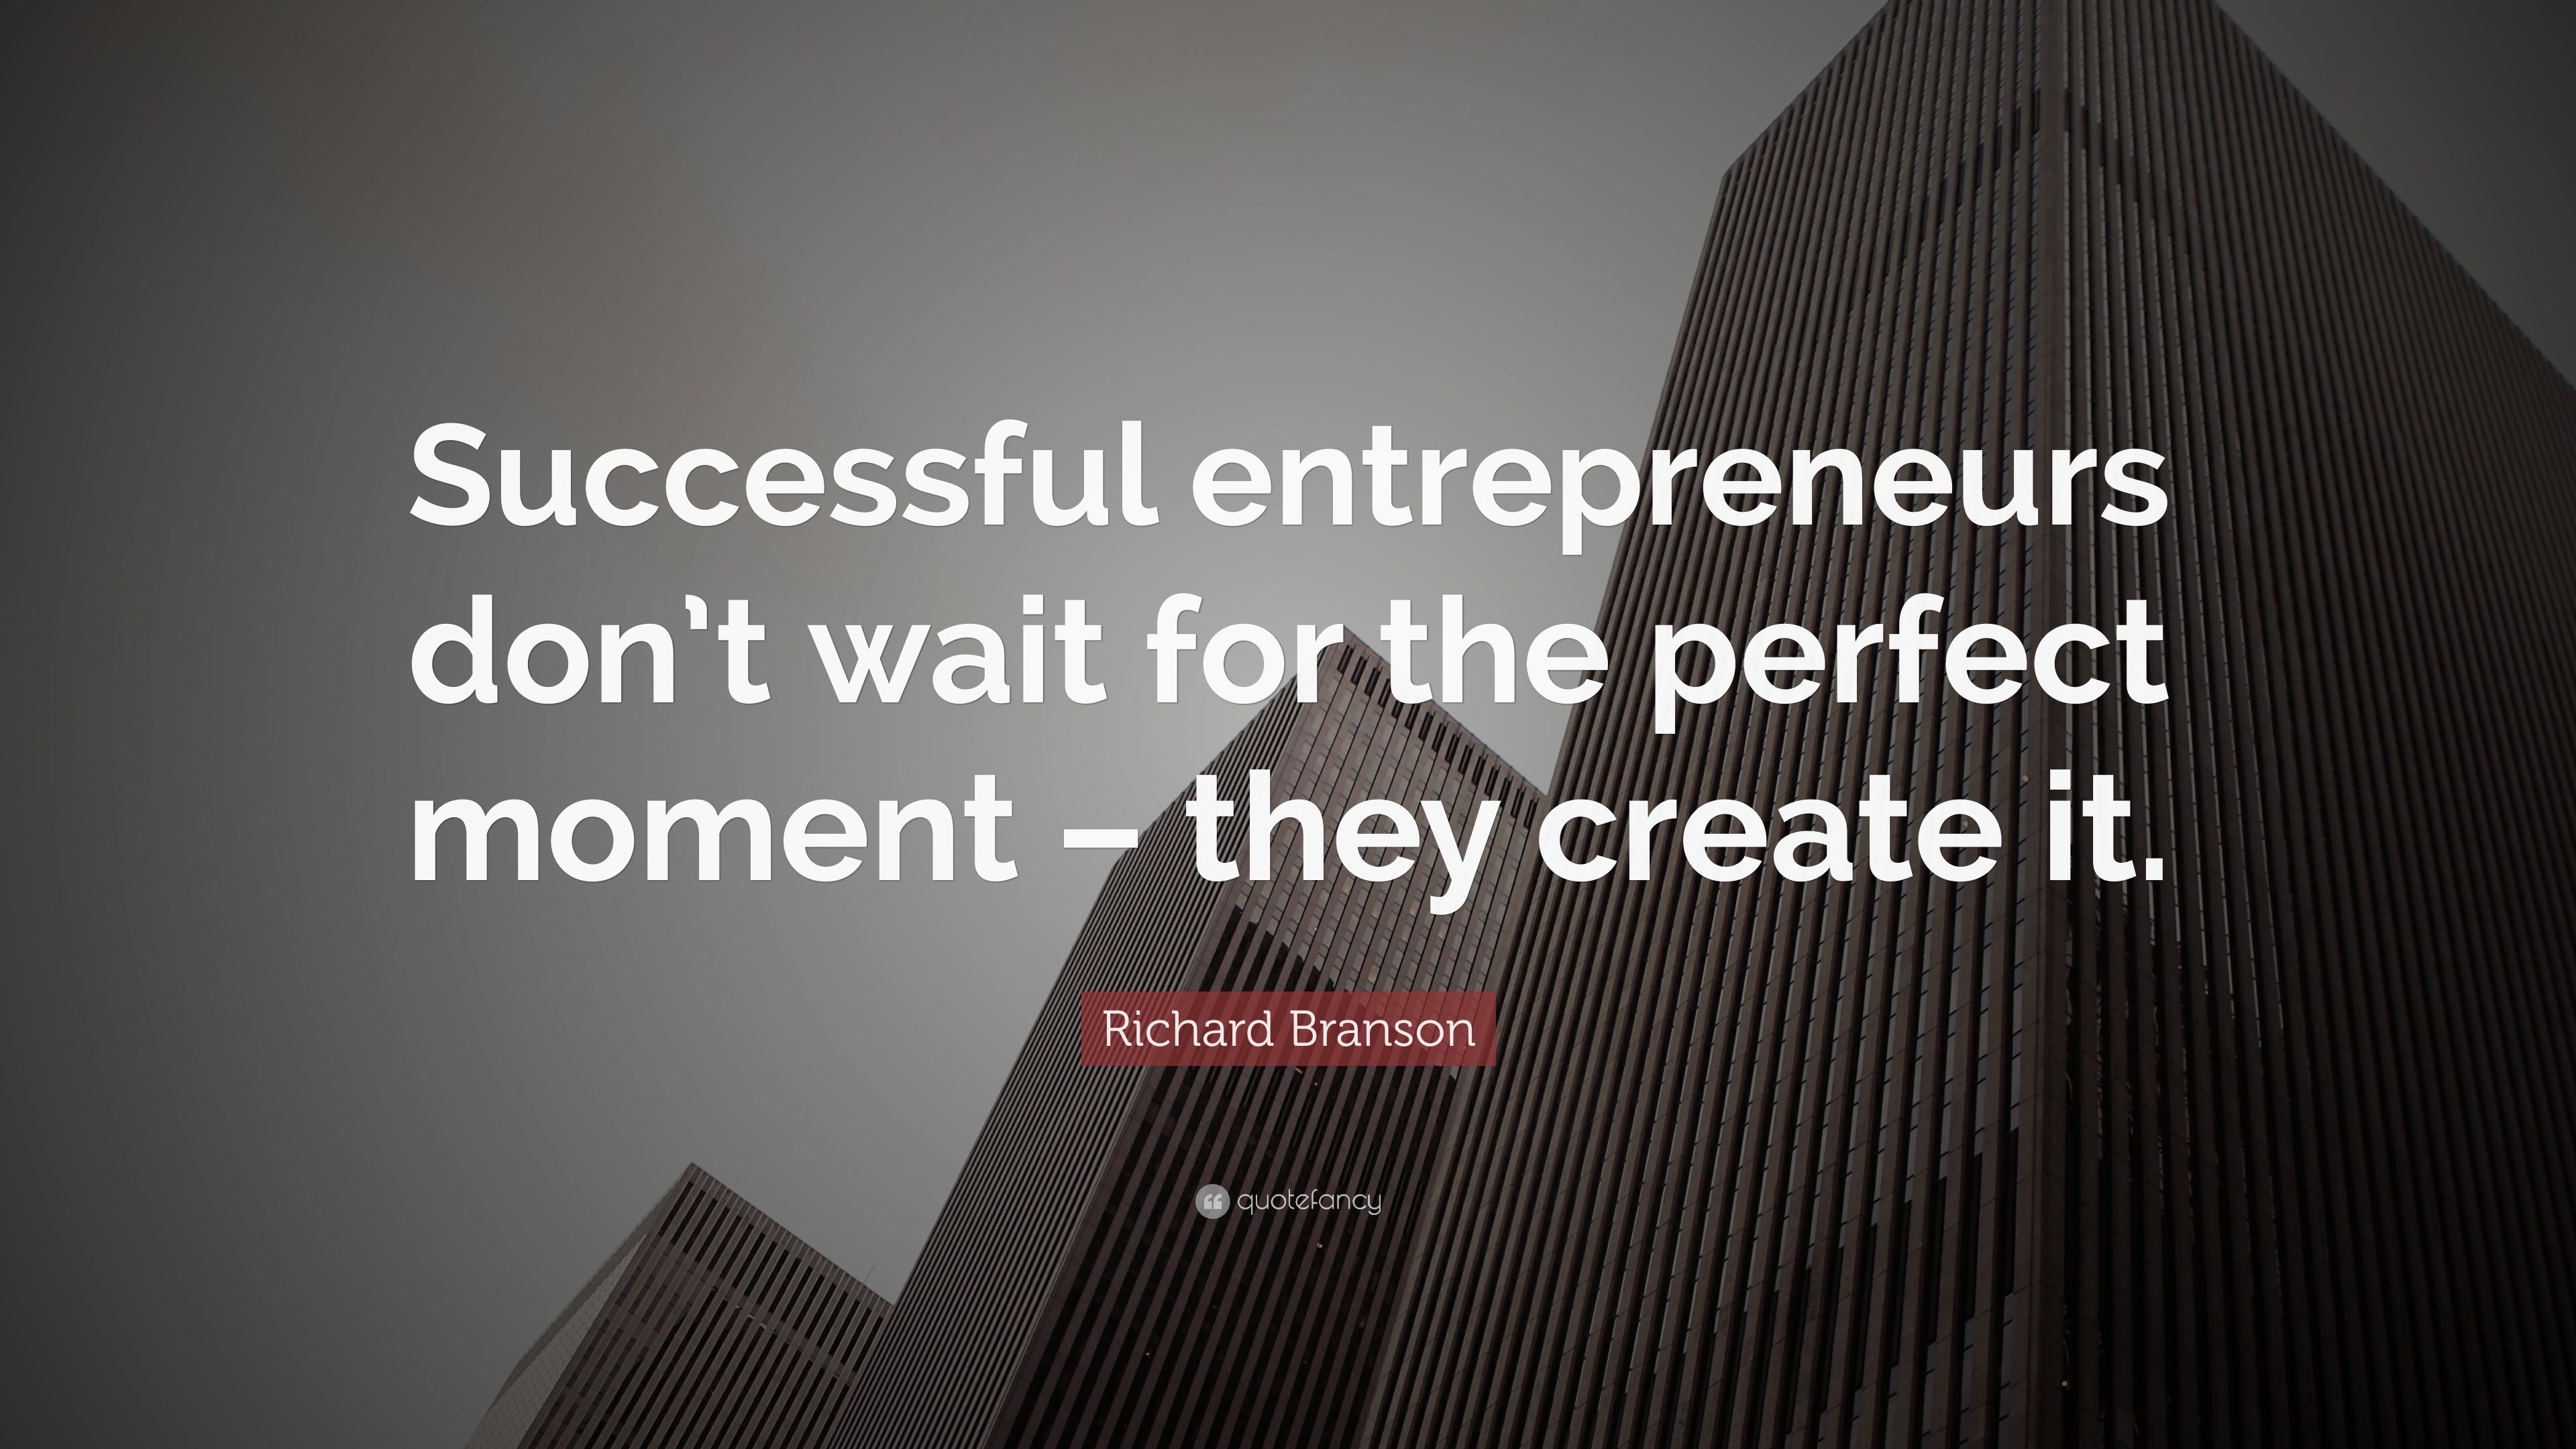 Richard Branson Quote: “Successful entrepreneurs don't wait for the perfect moment